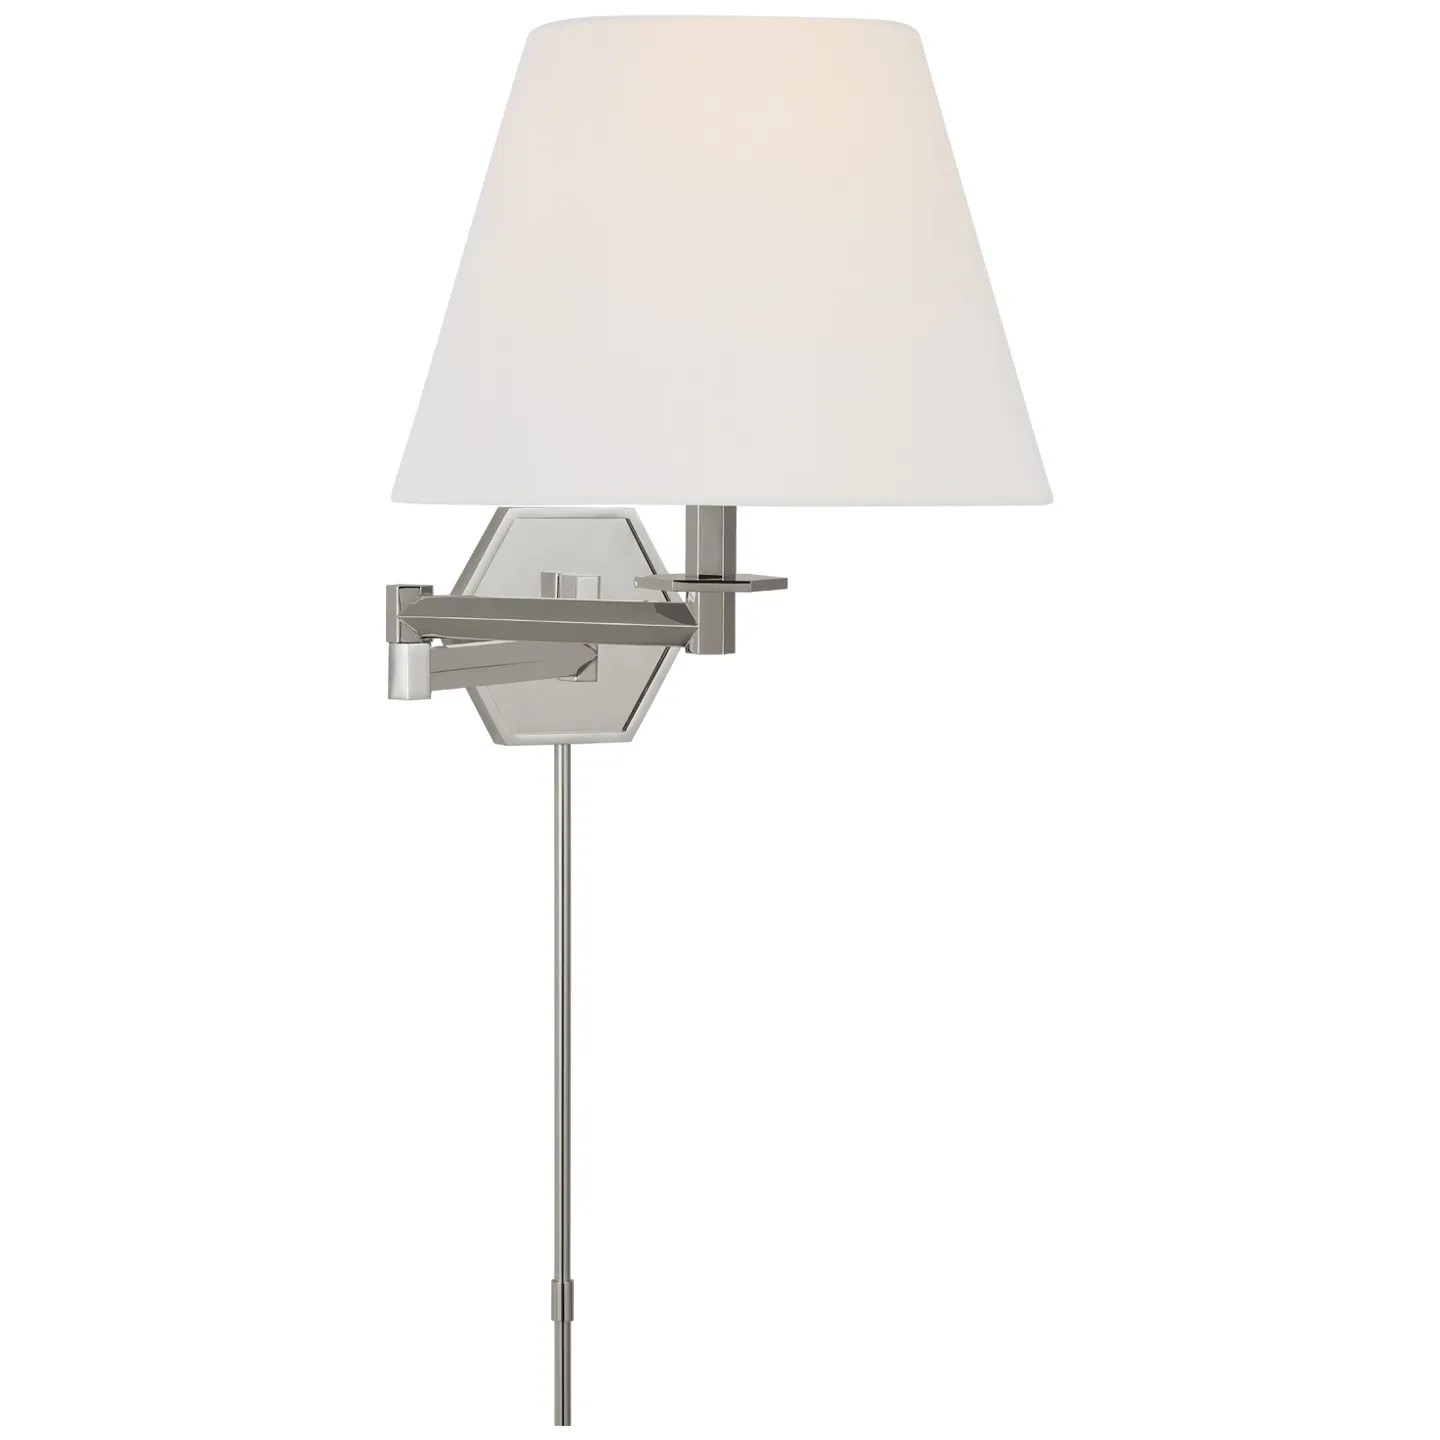 Olivier Swing Arm Wall Light in Polished Nickel with Linen Shade